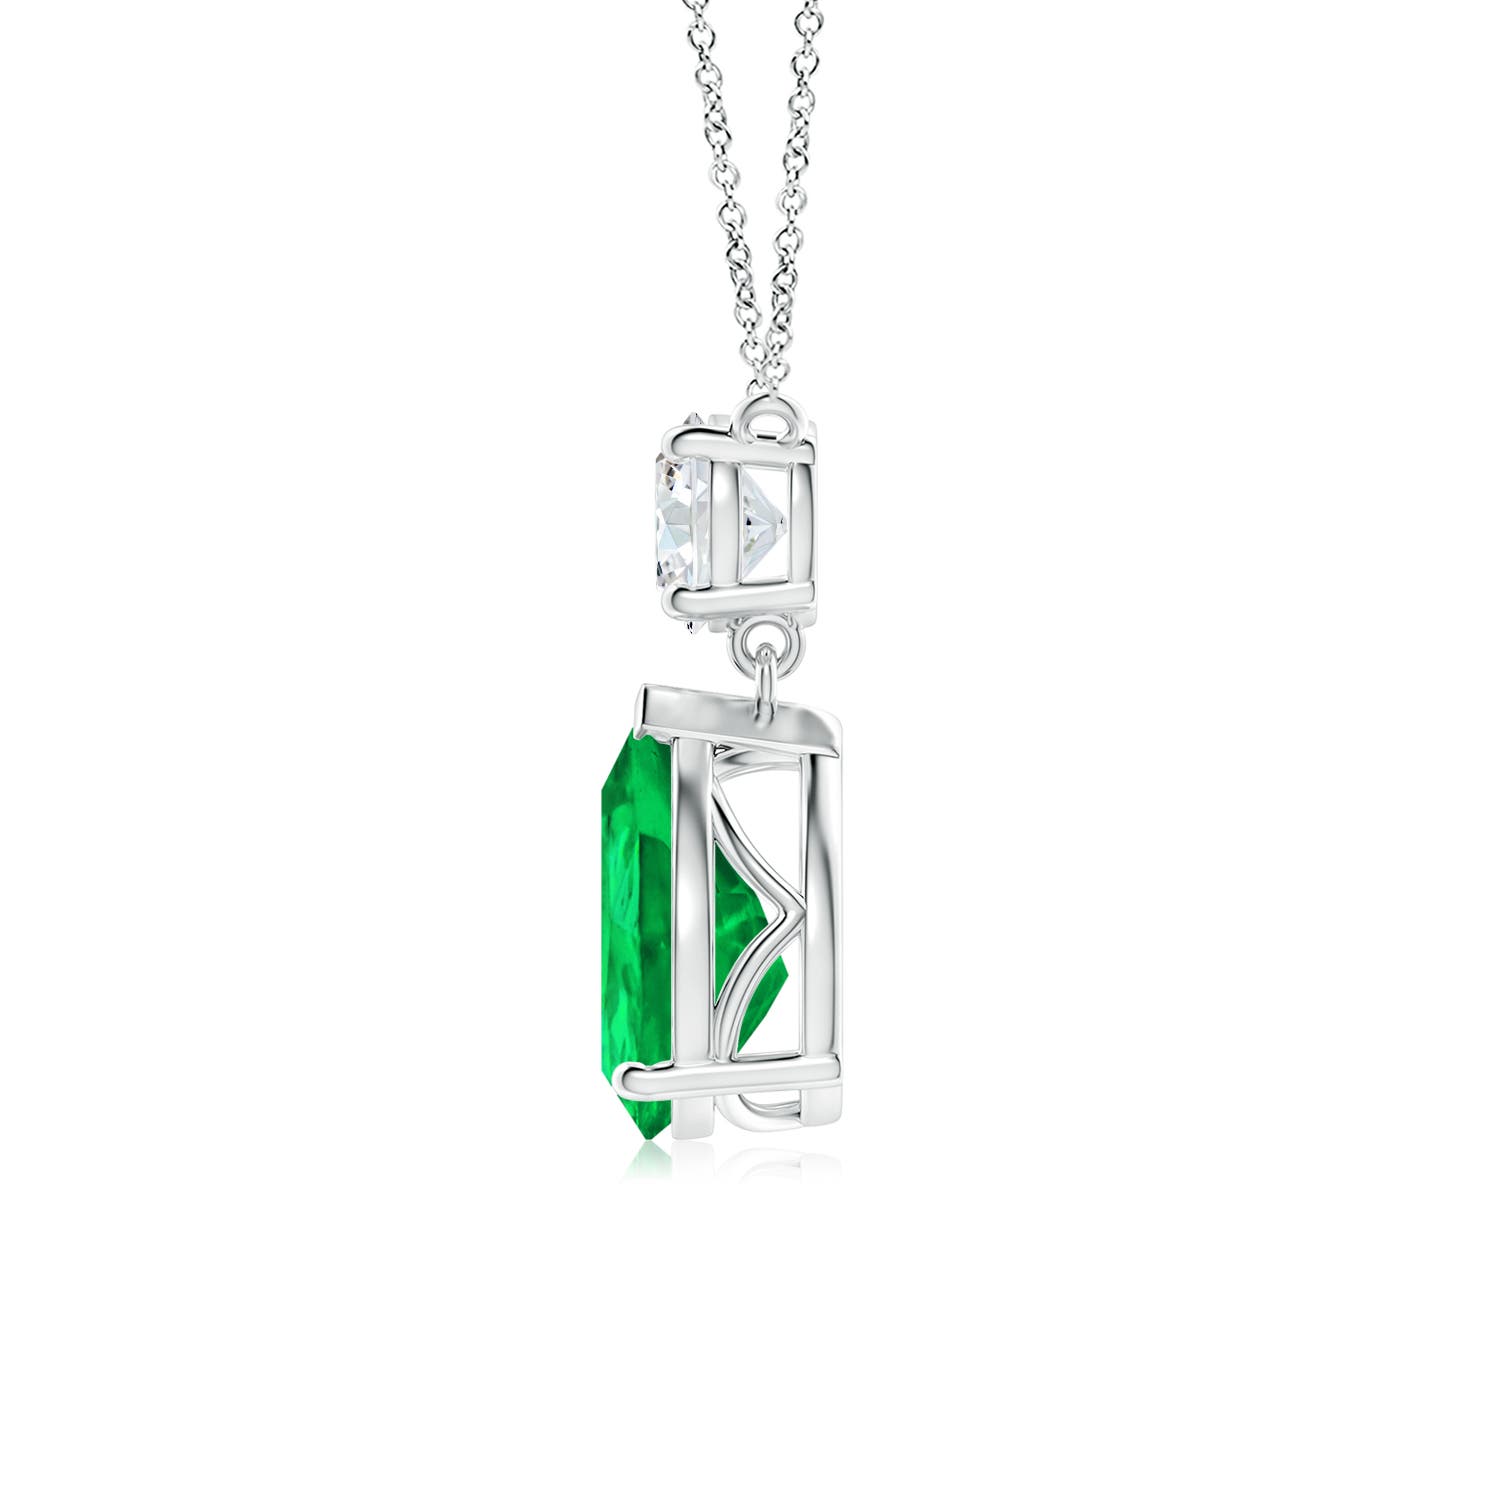 AAA - Emerald / 3 CT / 18 KT White Gold